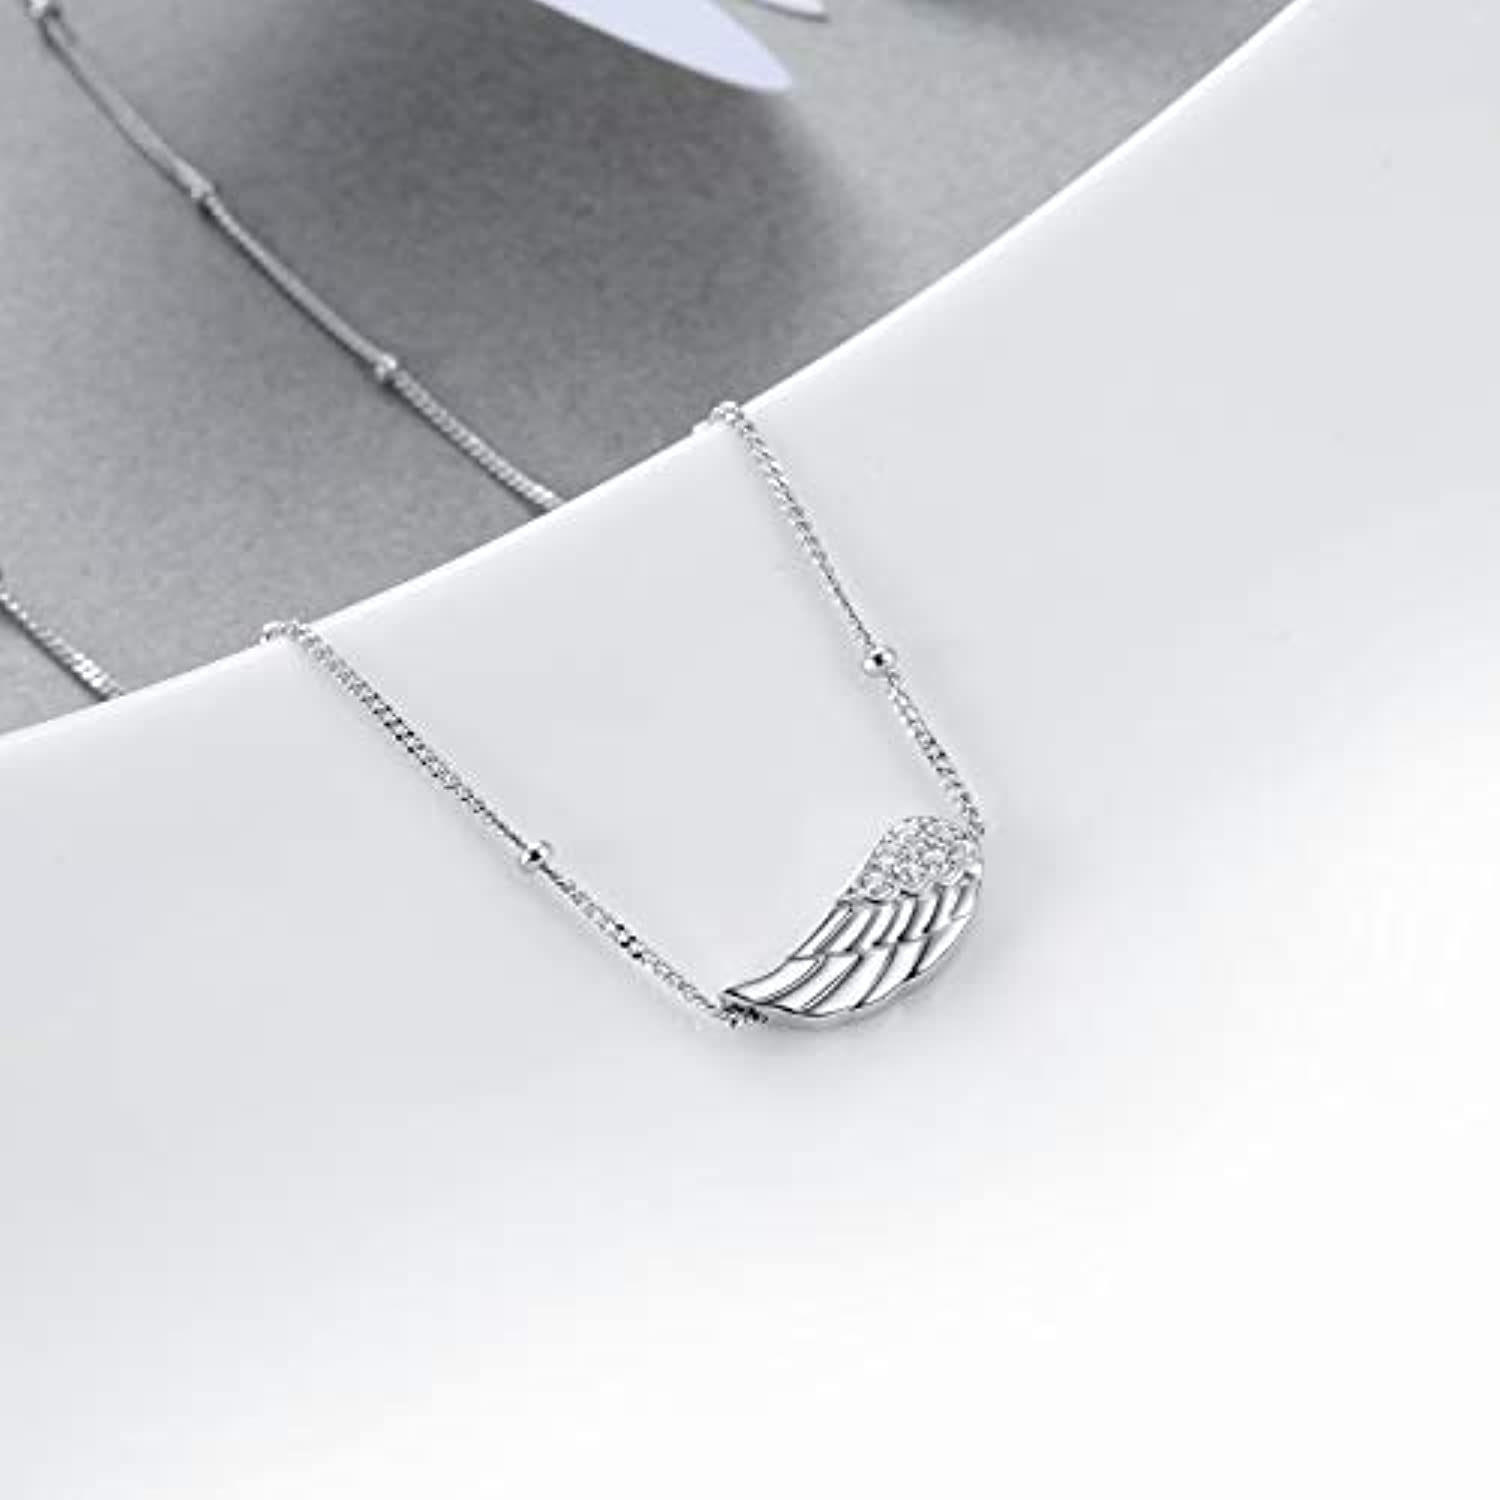 Angel Wings Necklace Sterling Silver Dainty Choker Pendant Necklace Jewelry Gifts for Women Girls